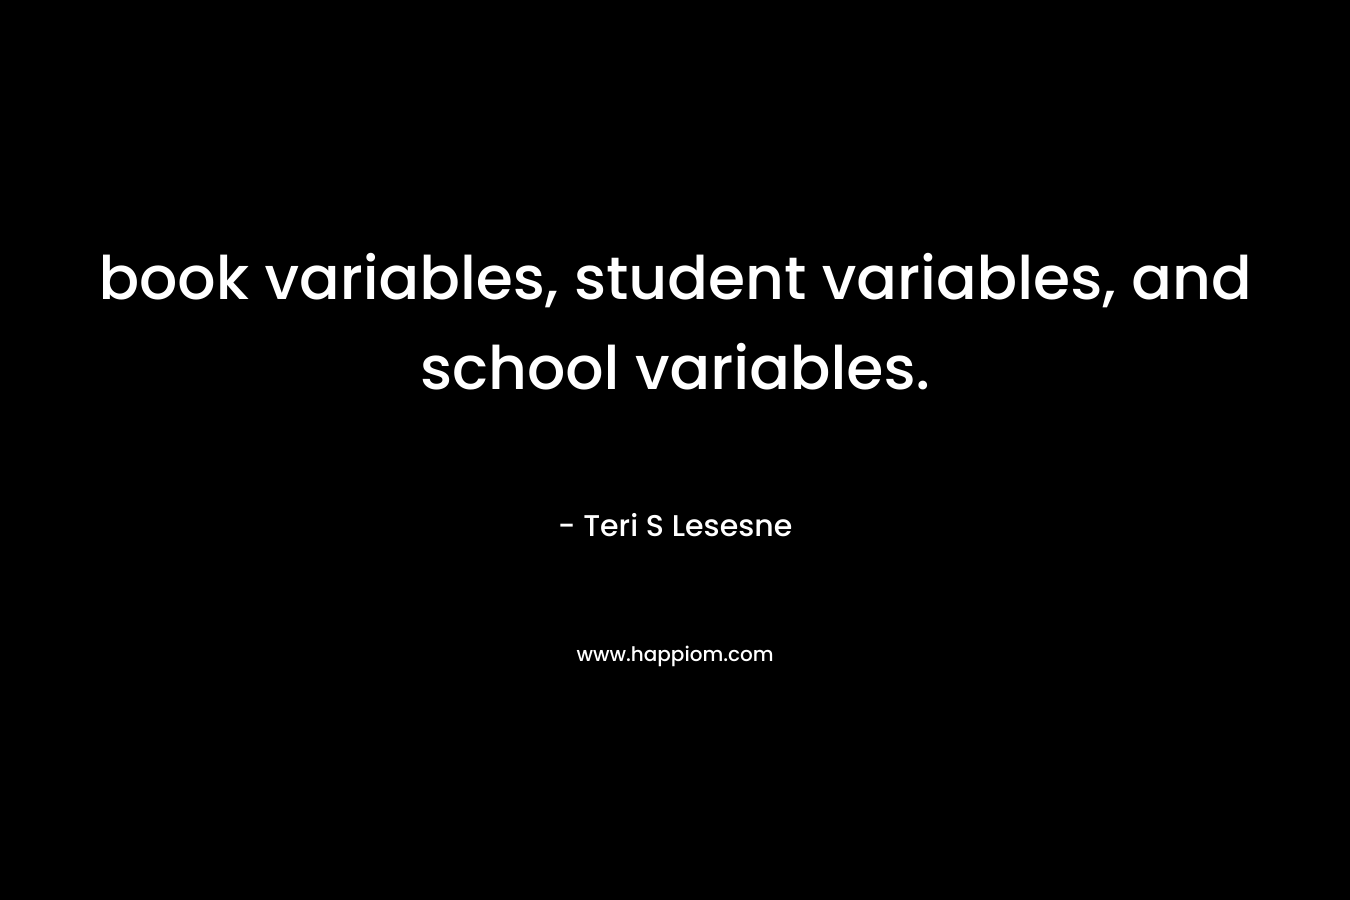 book variables, student variables, and school variables. – Teri S Lesesne